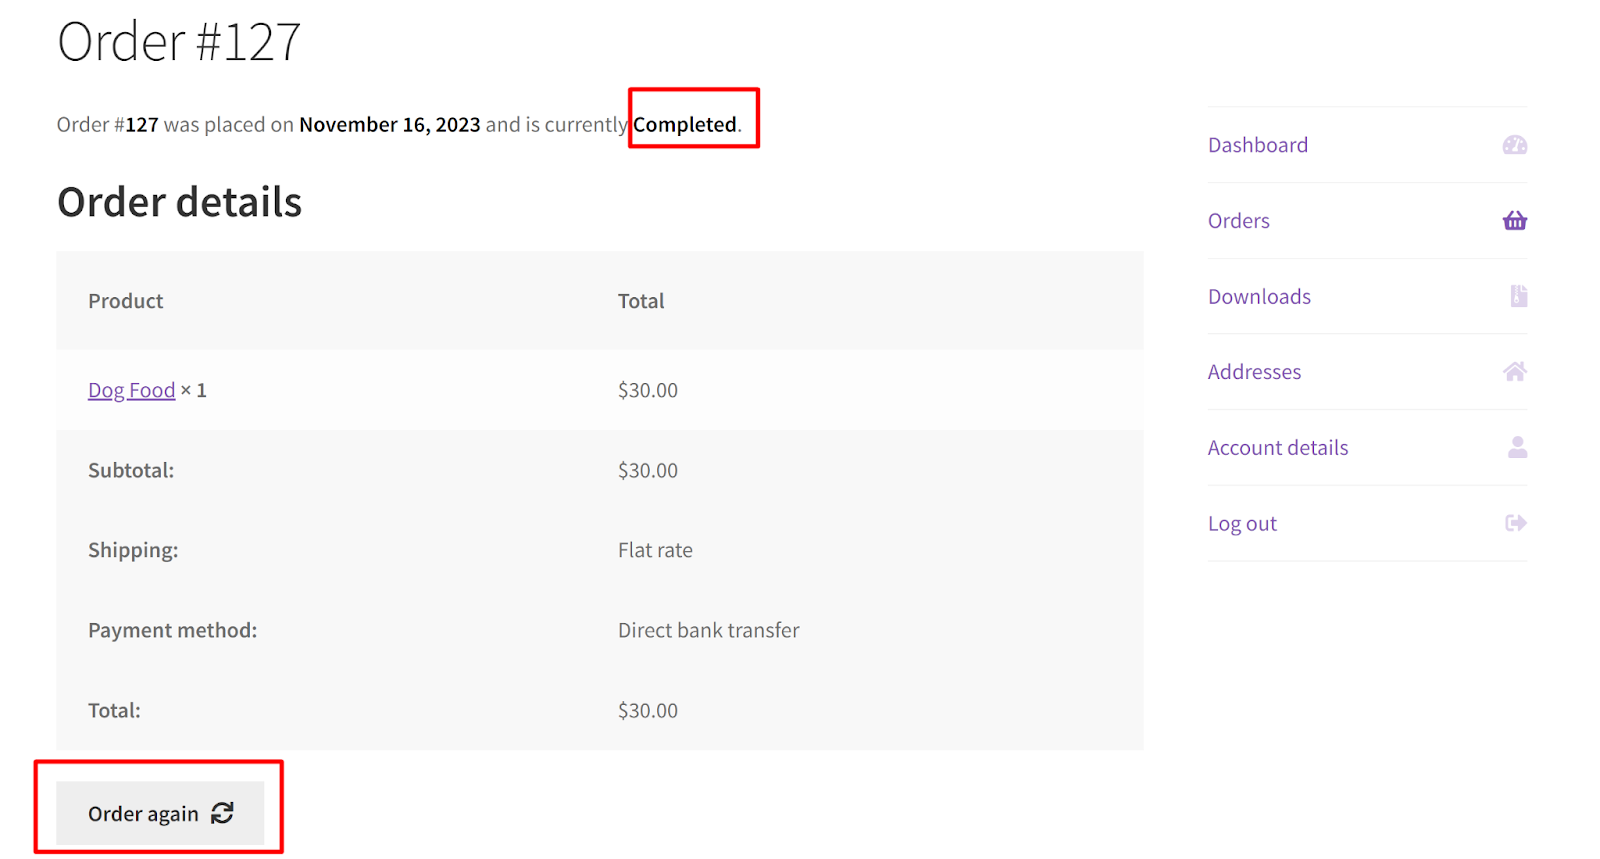 How to Add an 'Order Again' Button in WooCommerce on My Account > Orders Page? - Tyche Softwares